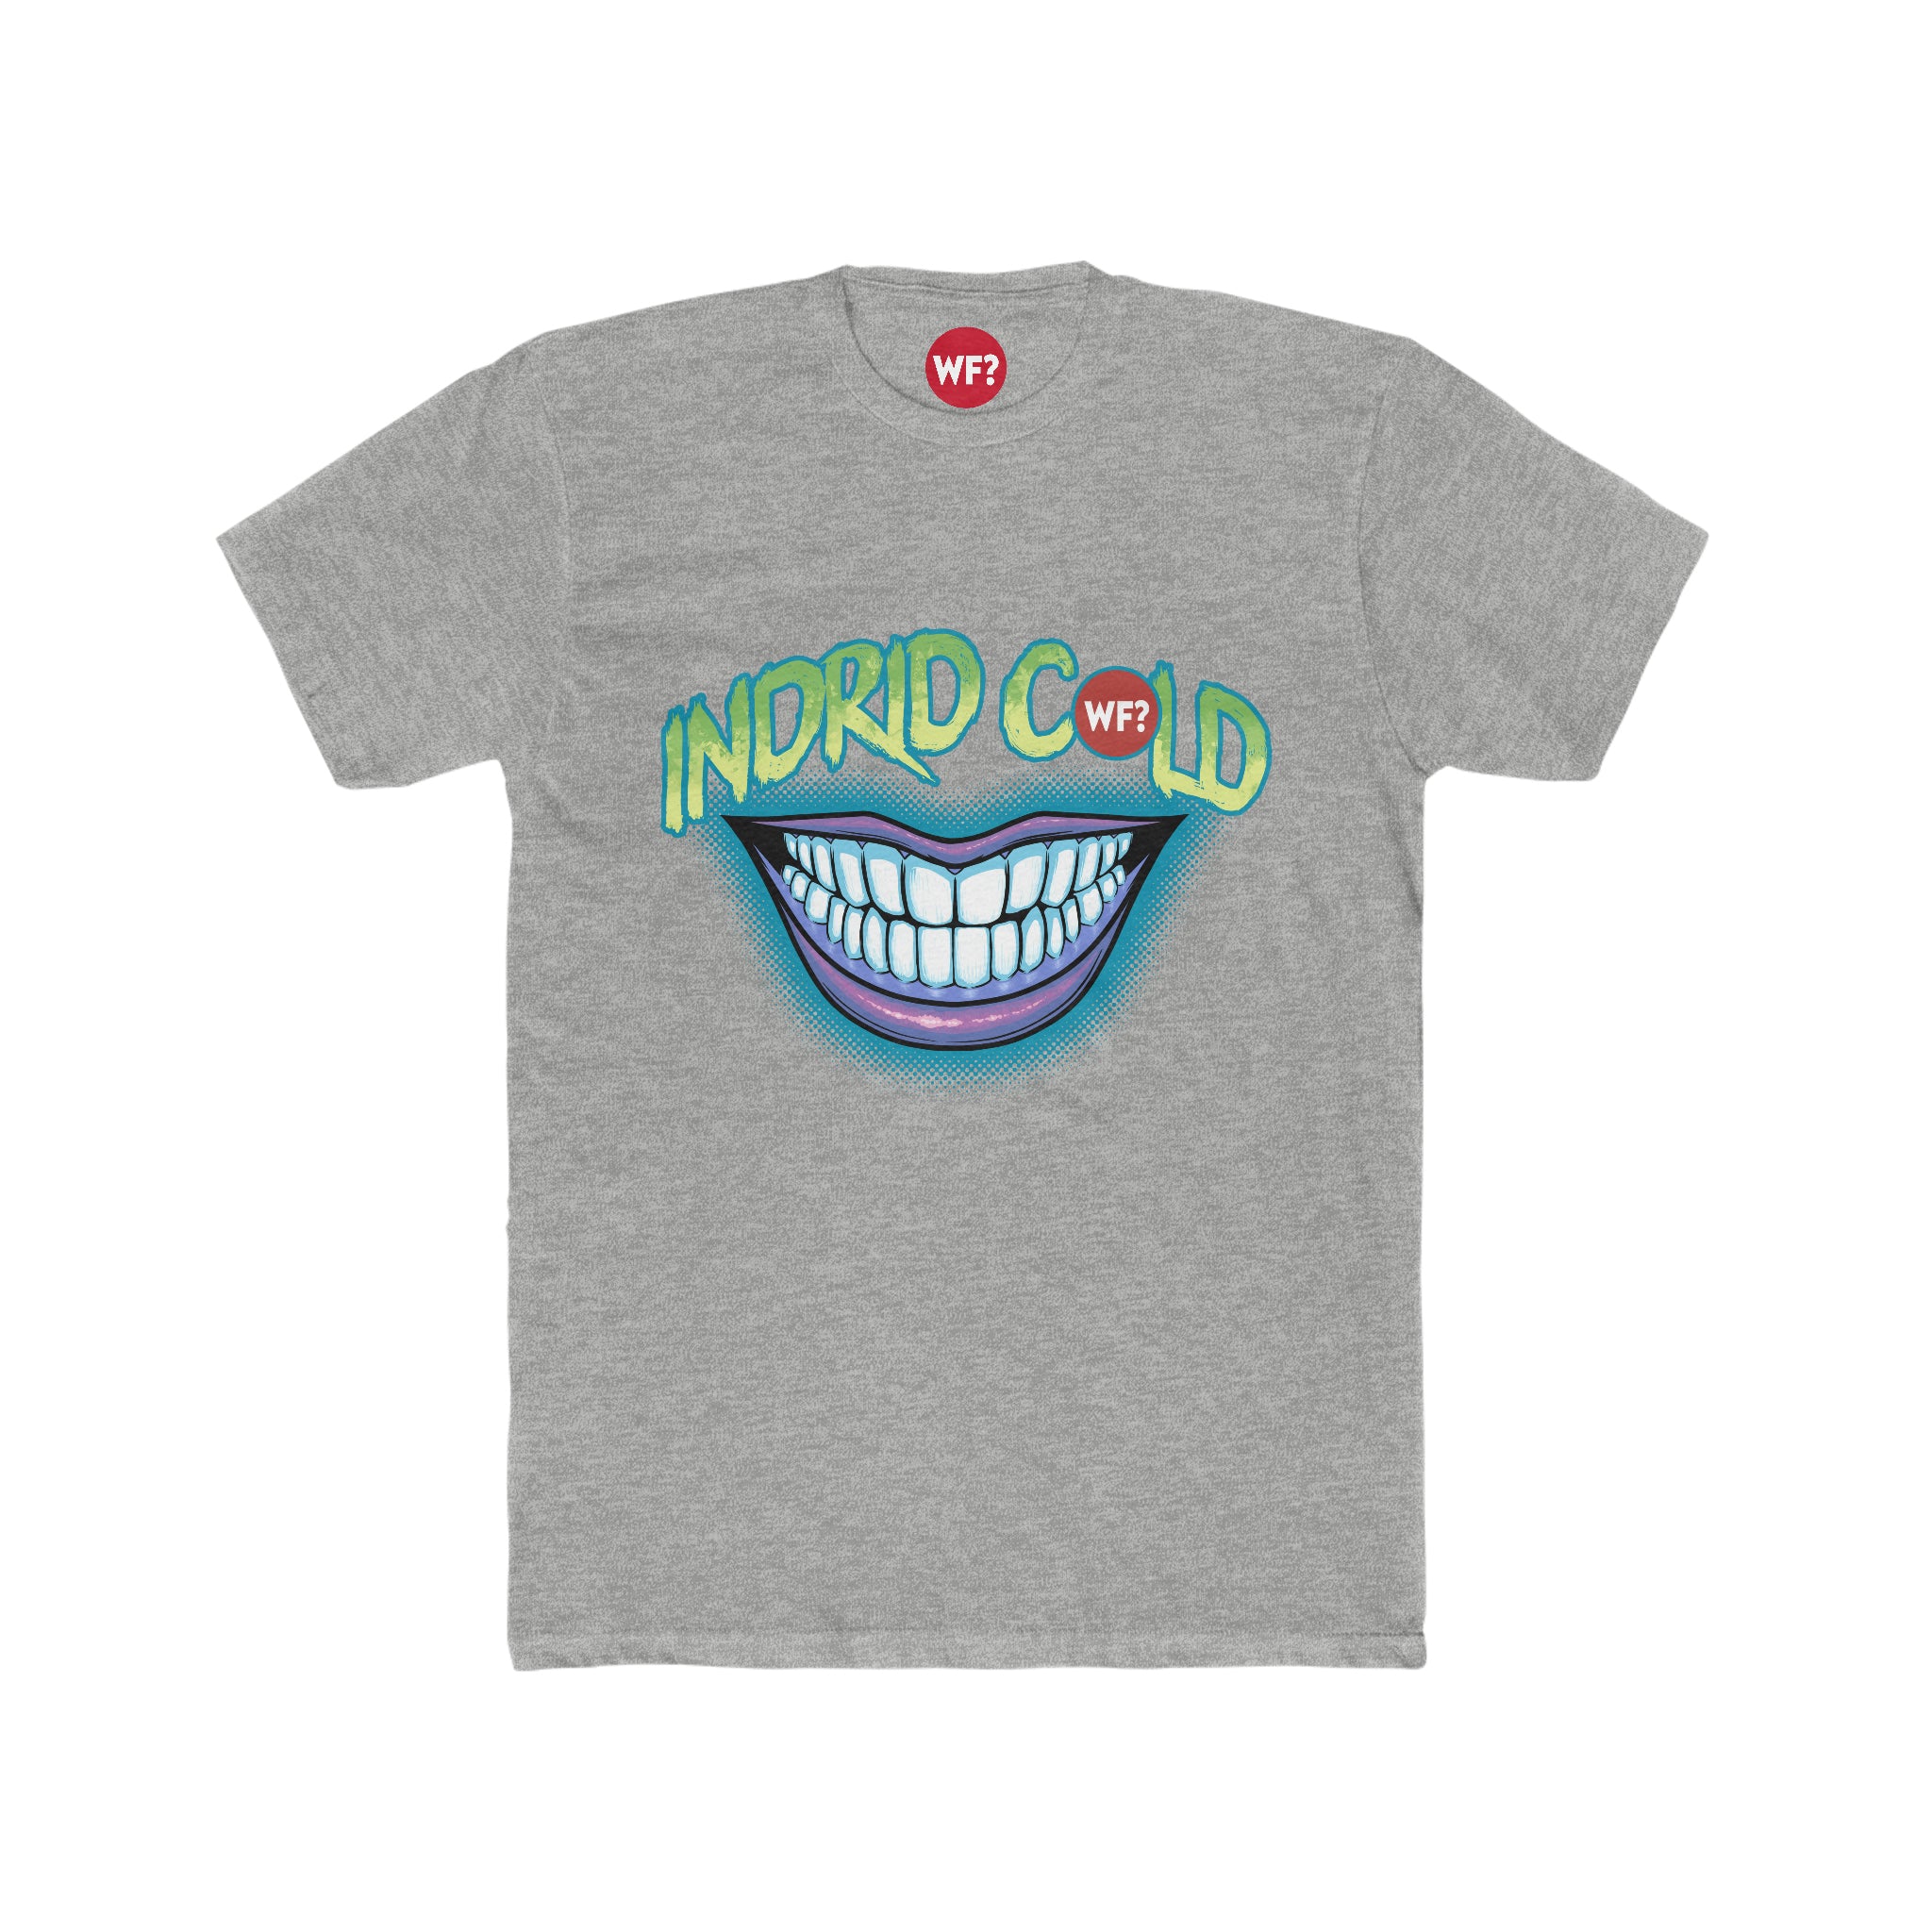 Buy heather-grey Indrid Cold Limited T-Shirt